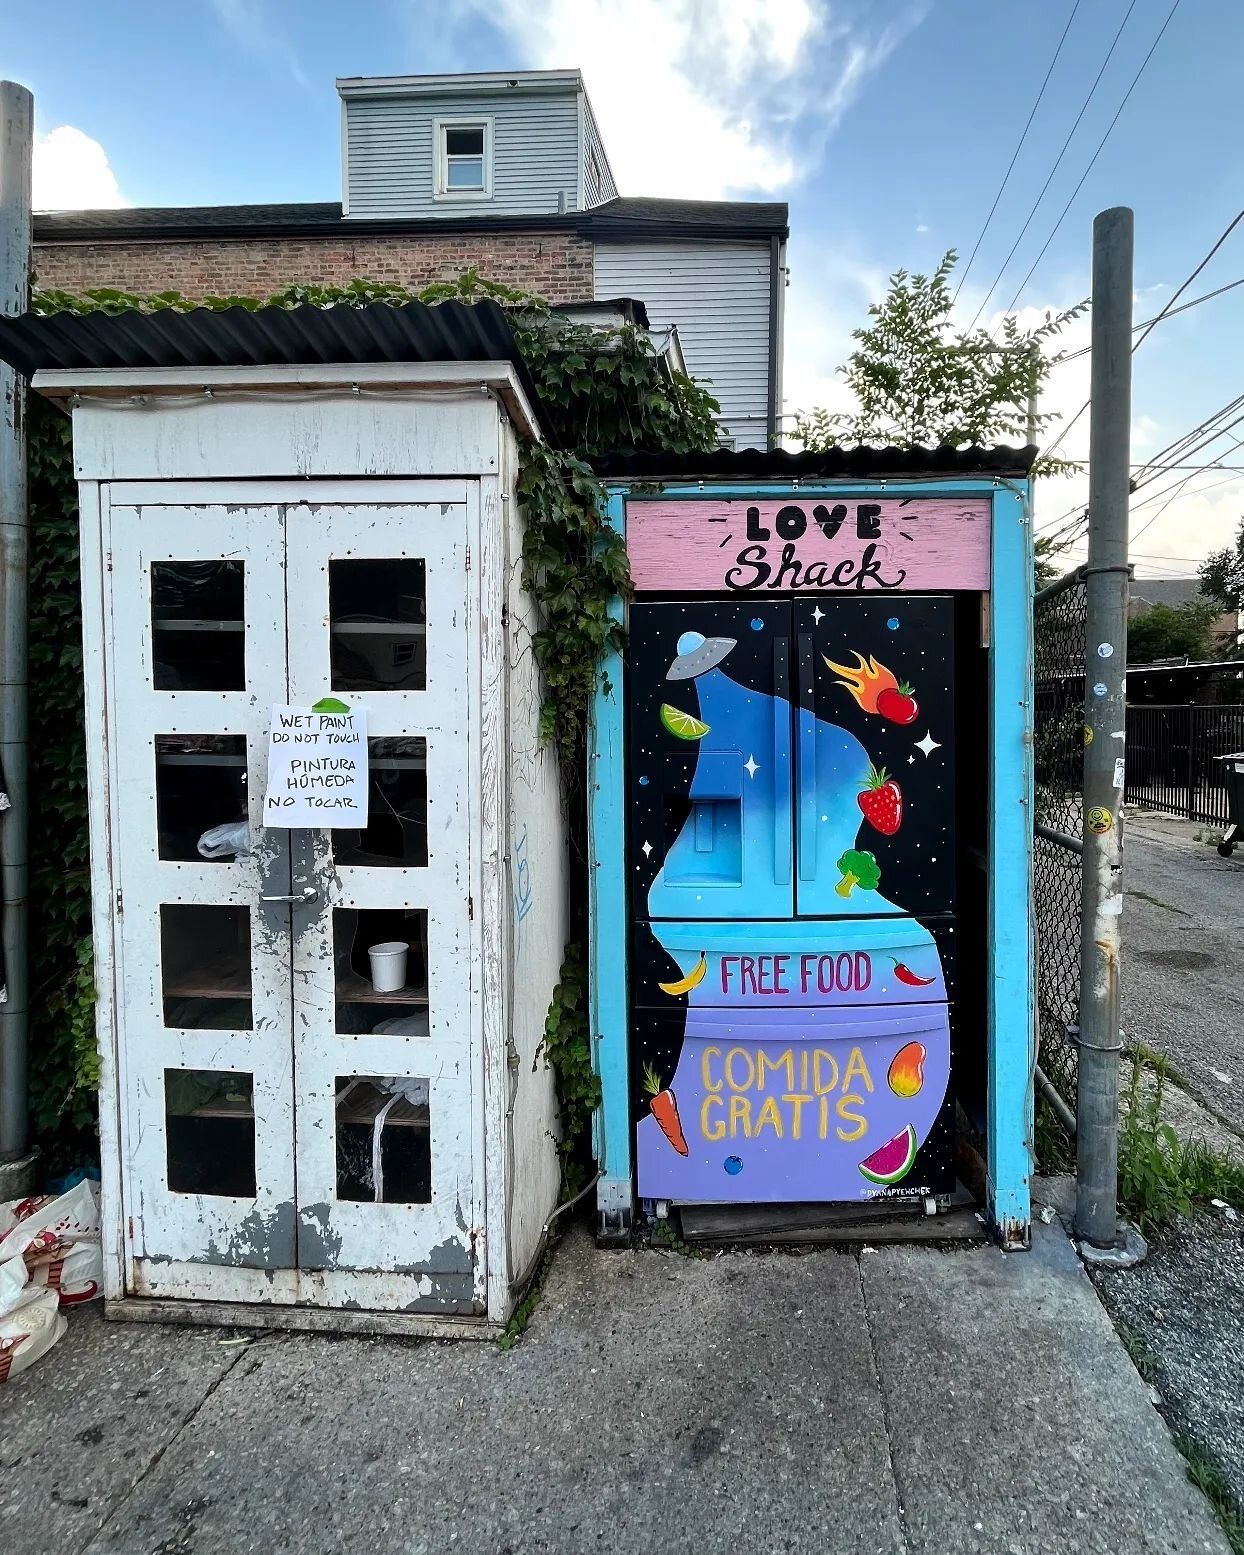 The Love Shack in Little Village was the very first site in the Love Fridge network. In honor of our 3-year anniversary, @jameswurm installed a new bigger fridge, and @dyanapyehchek came back to give it a cosmic paint job glow-up. We love it and hope